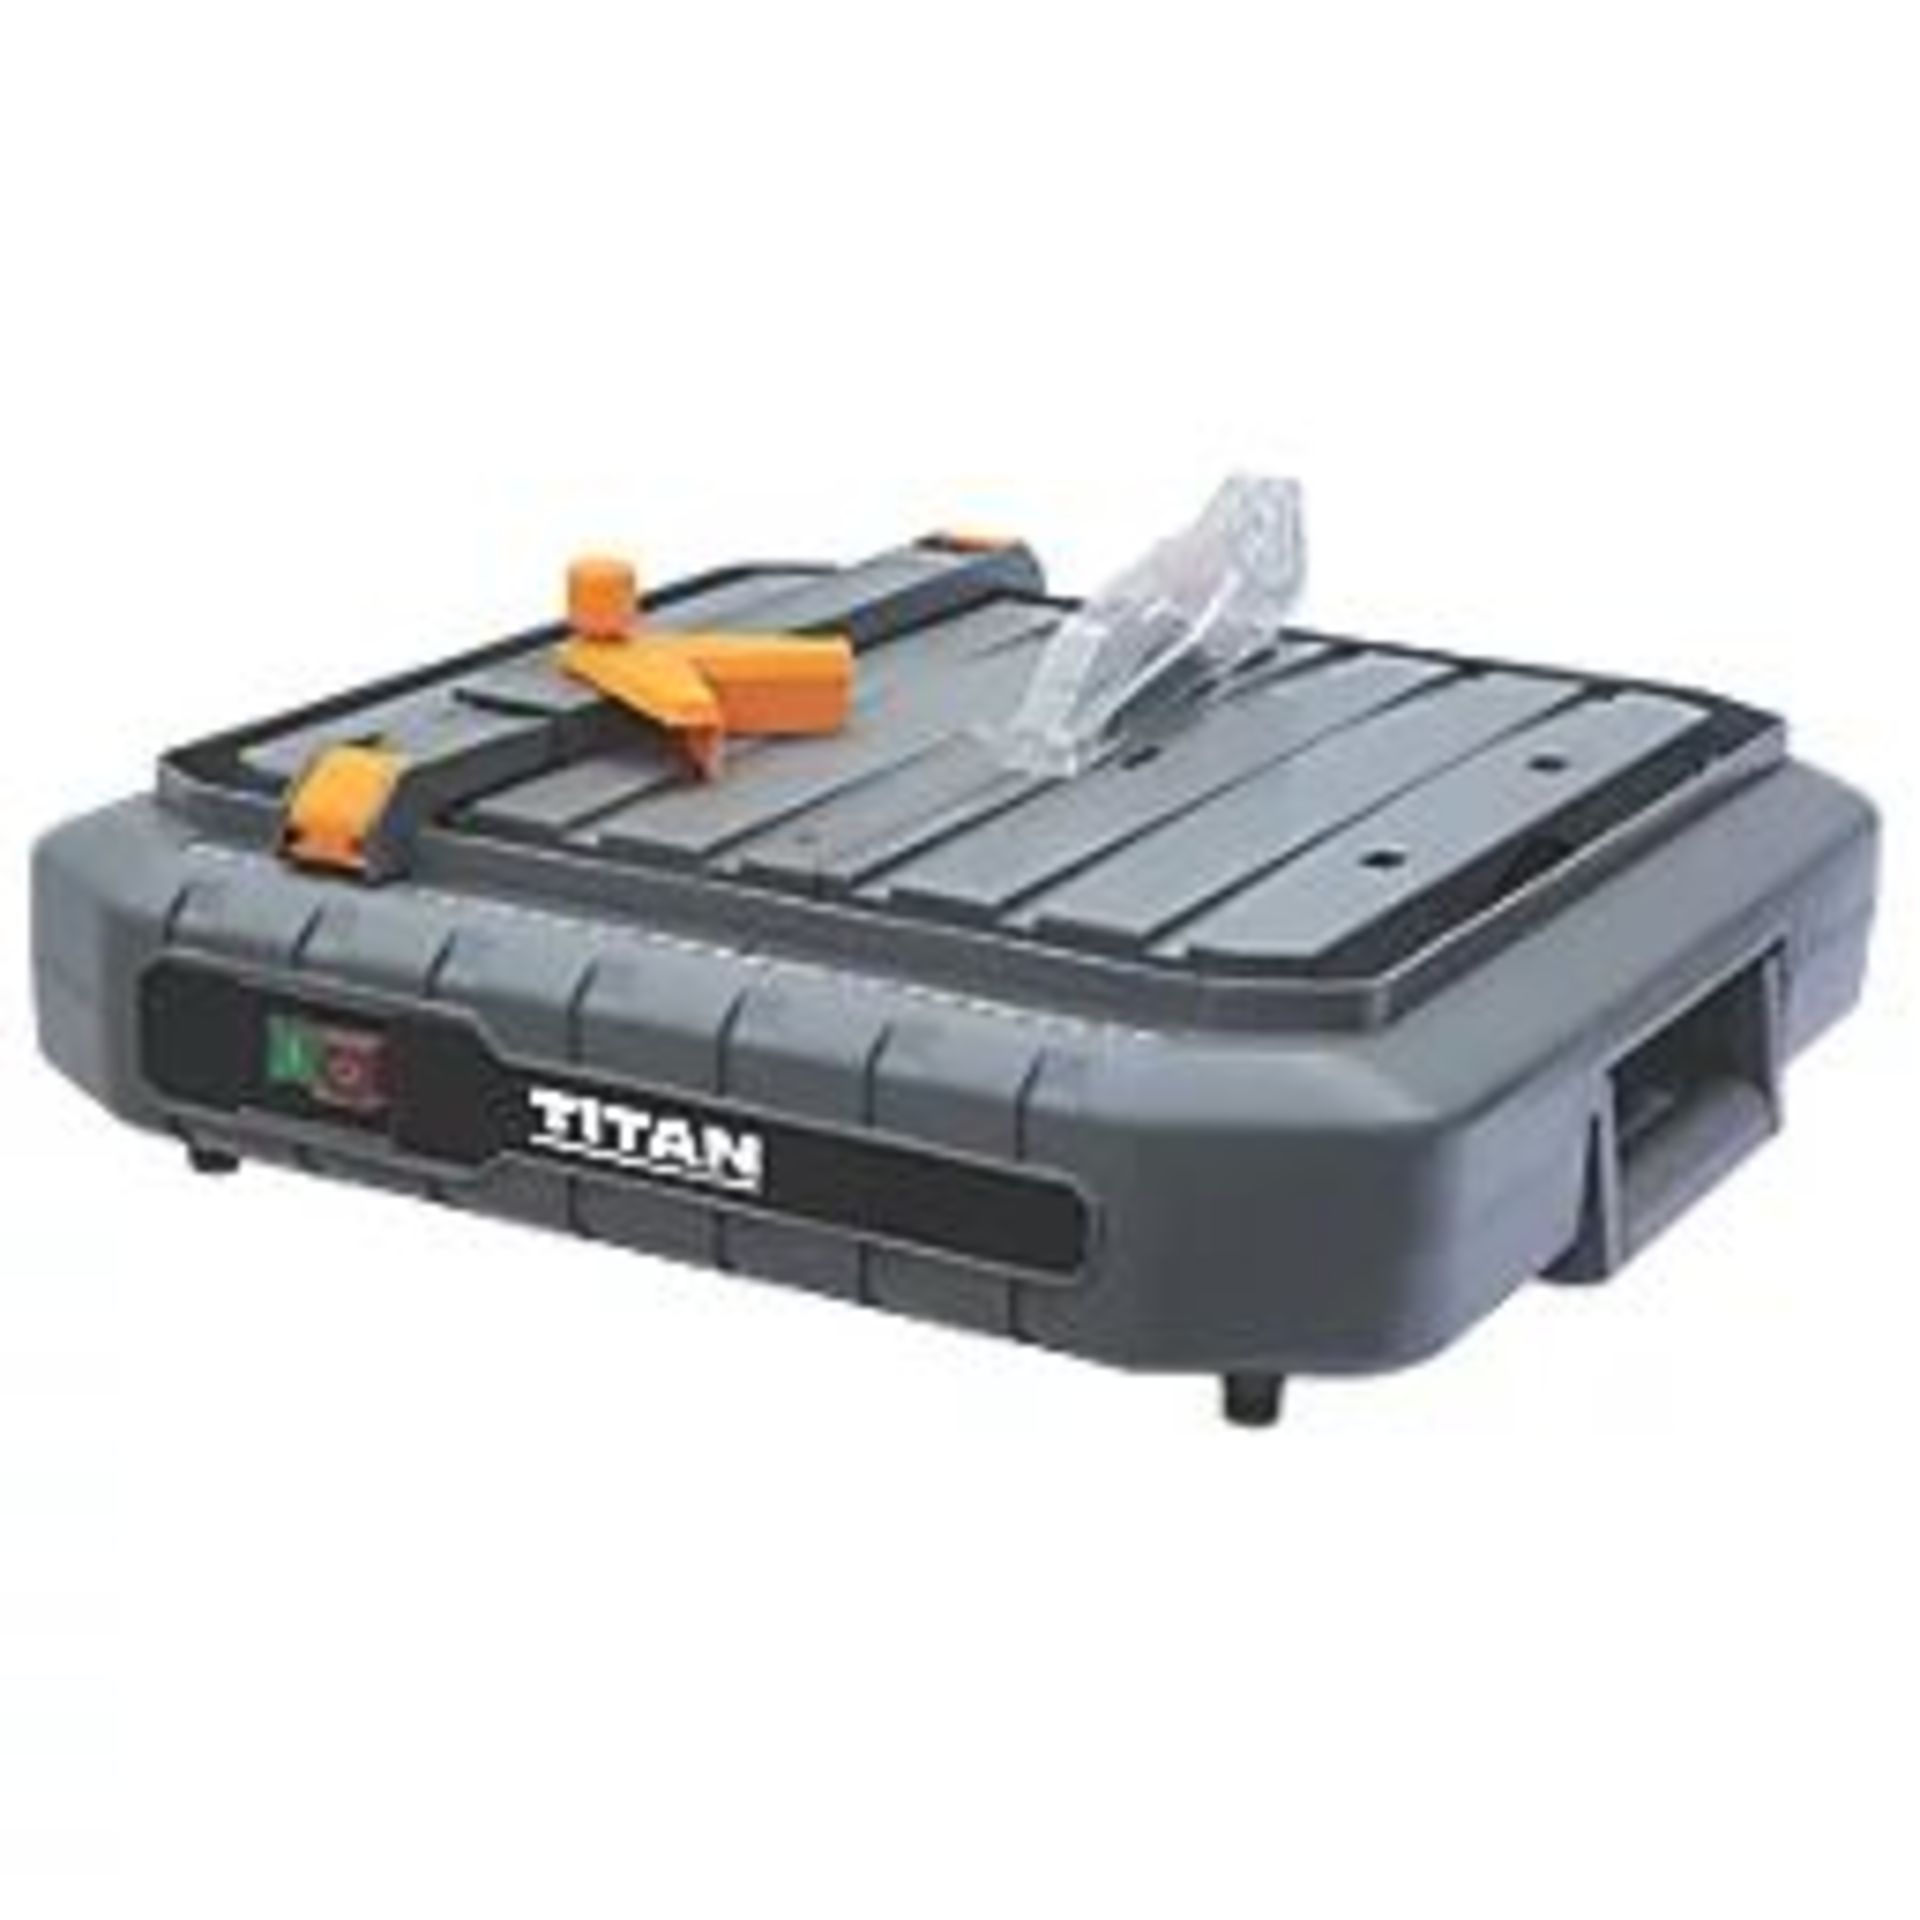 TITAN TC115I 500W ELECTRIC TILE CUTTER 240V. - P5. 500W tile cutter with high torque anti-stall